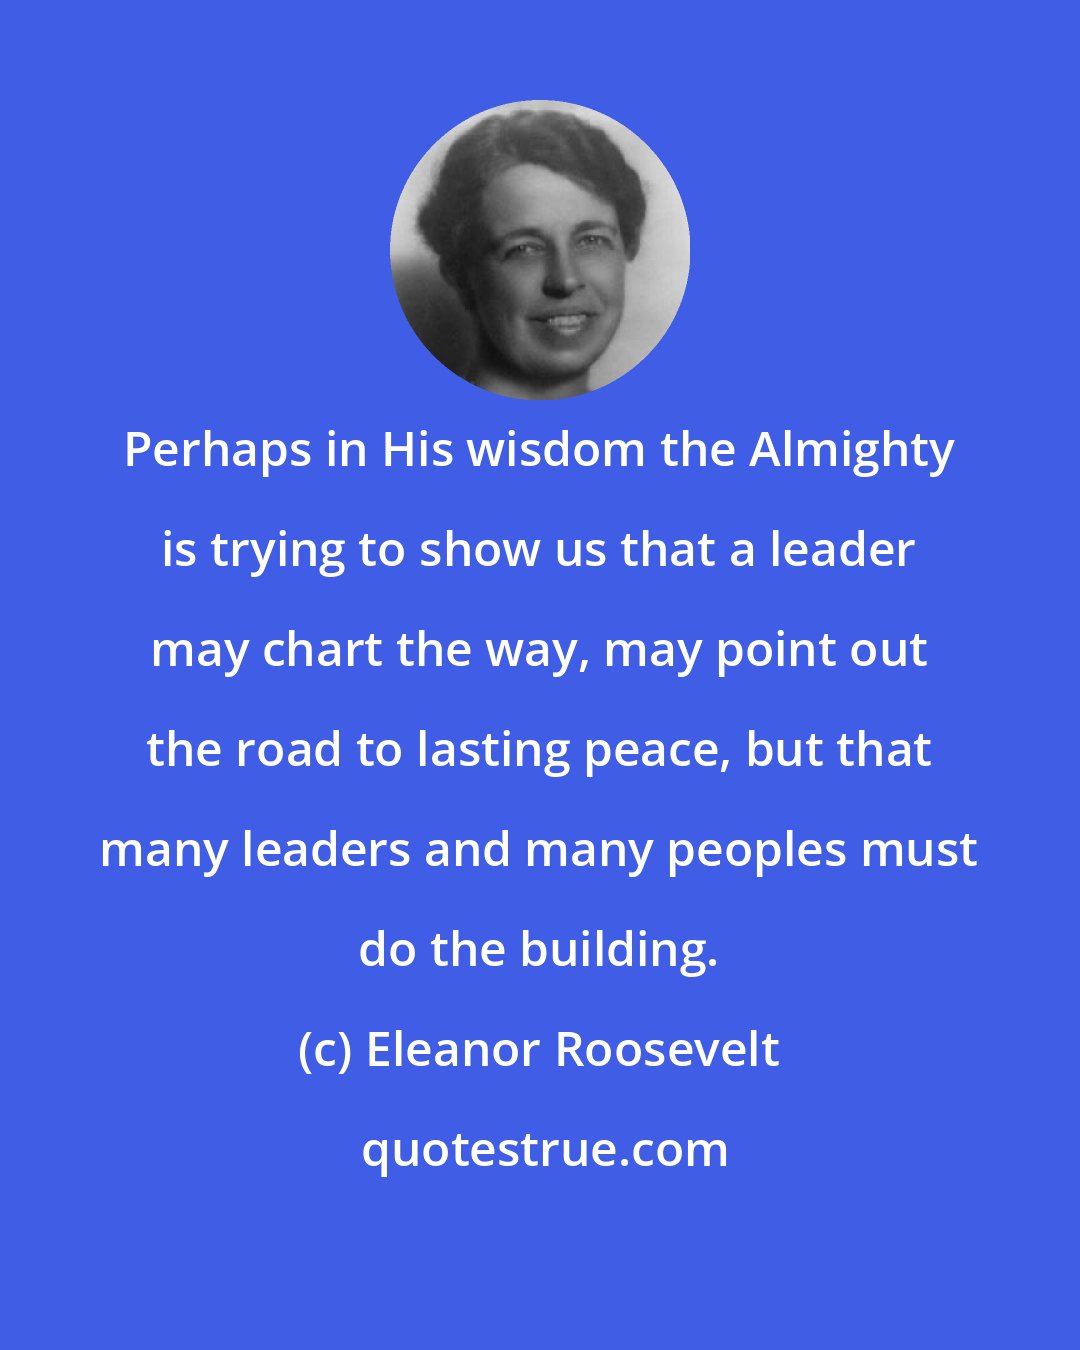 Eleanor Roosevelt: Perhaps in His wisdom the Almighty is trying to show us that a leader may chart the way, may point out the road to lasting peace, but that many leaders and many peoples must do the building.